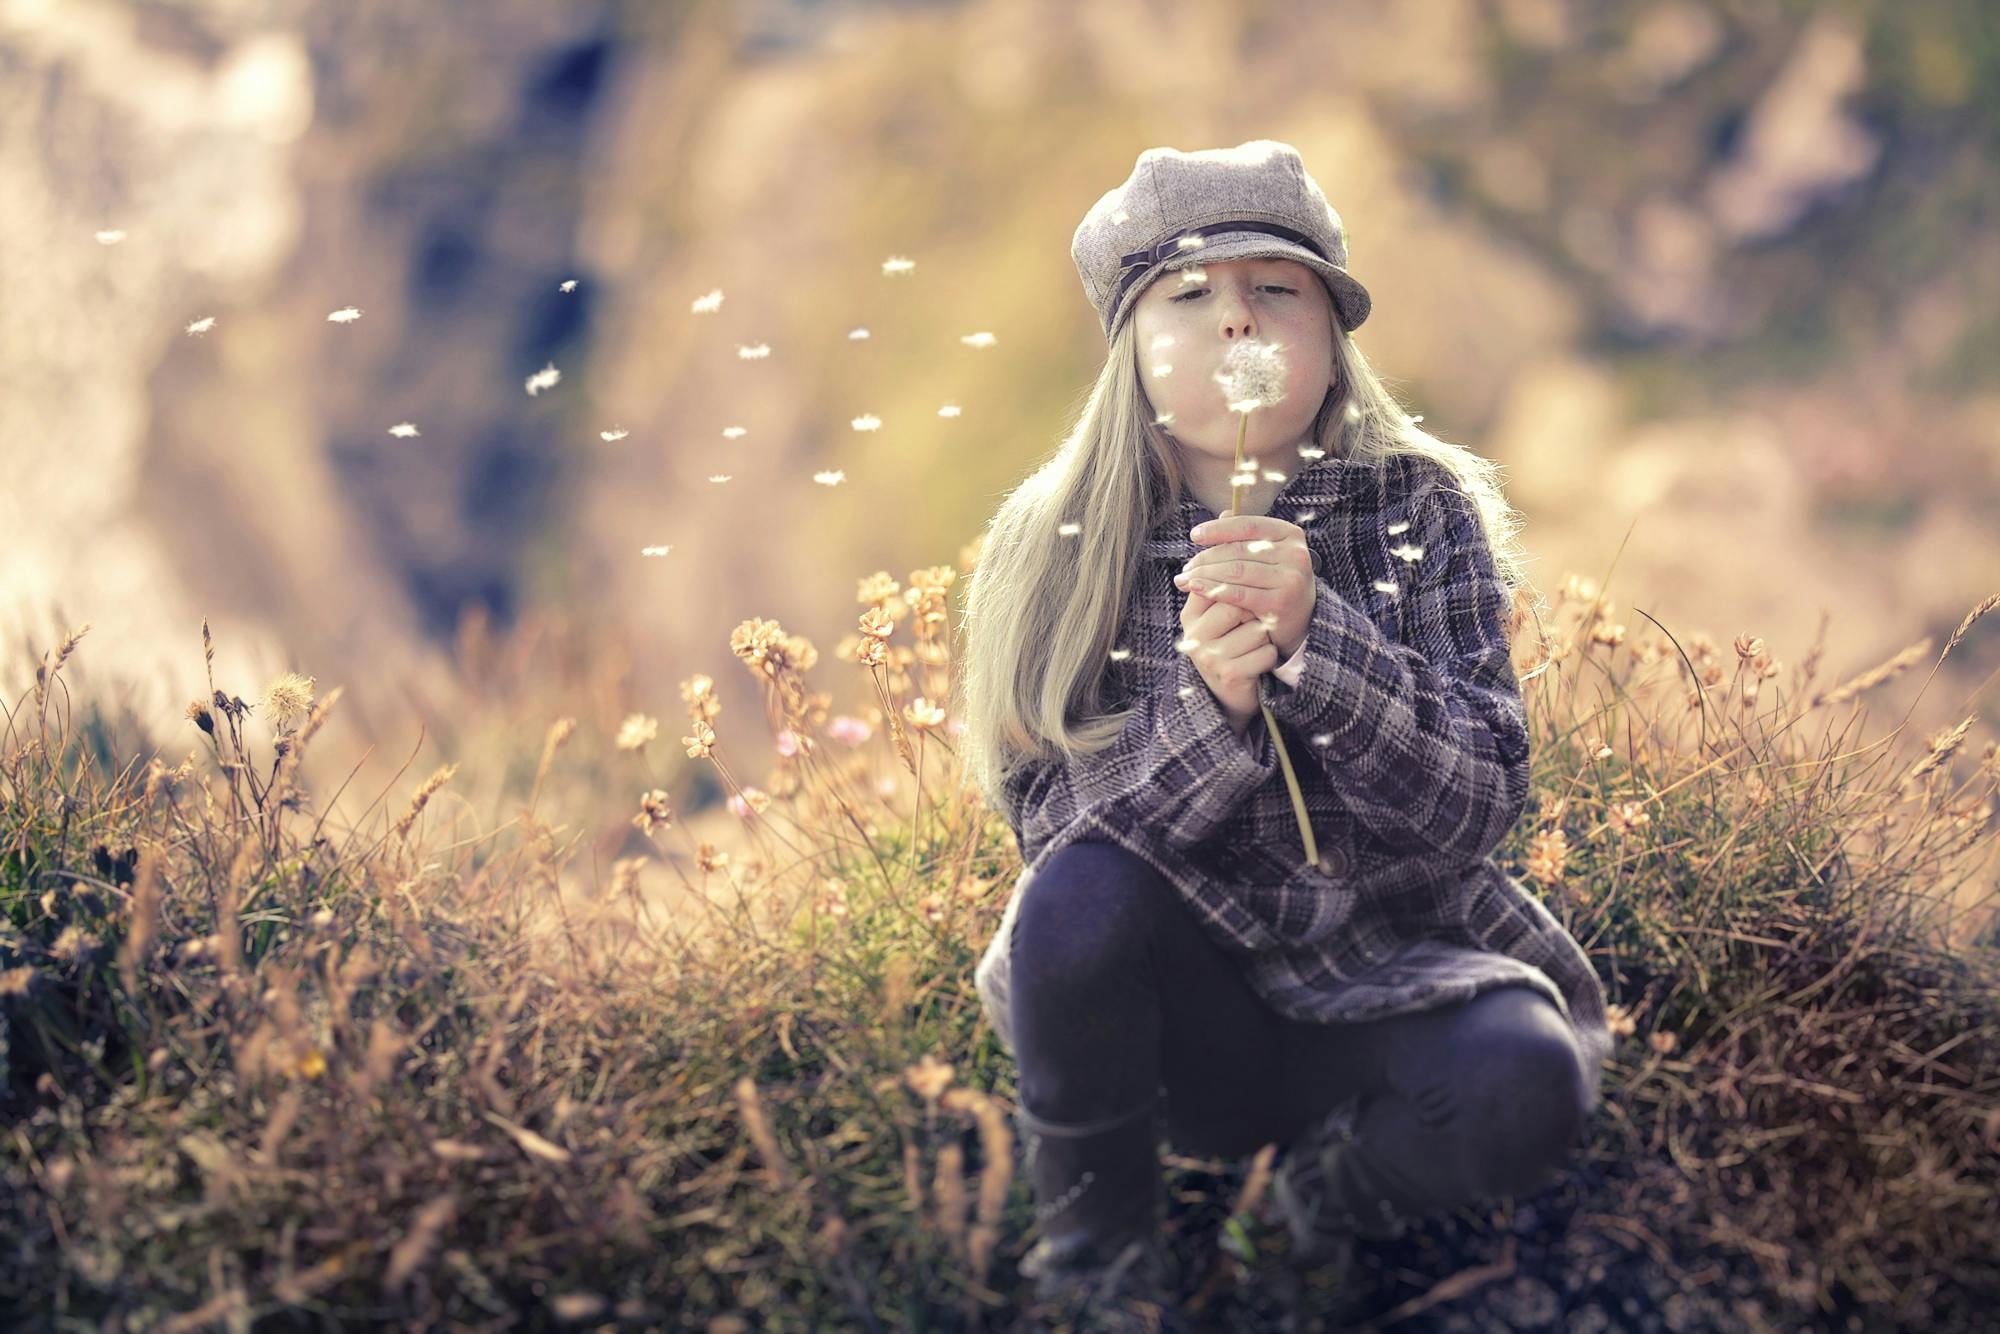 Girl Blowing Bubbles in Shallow Photo